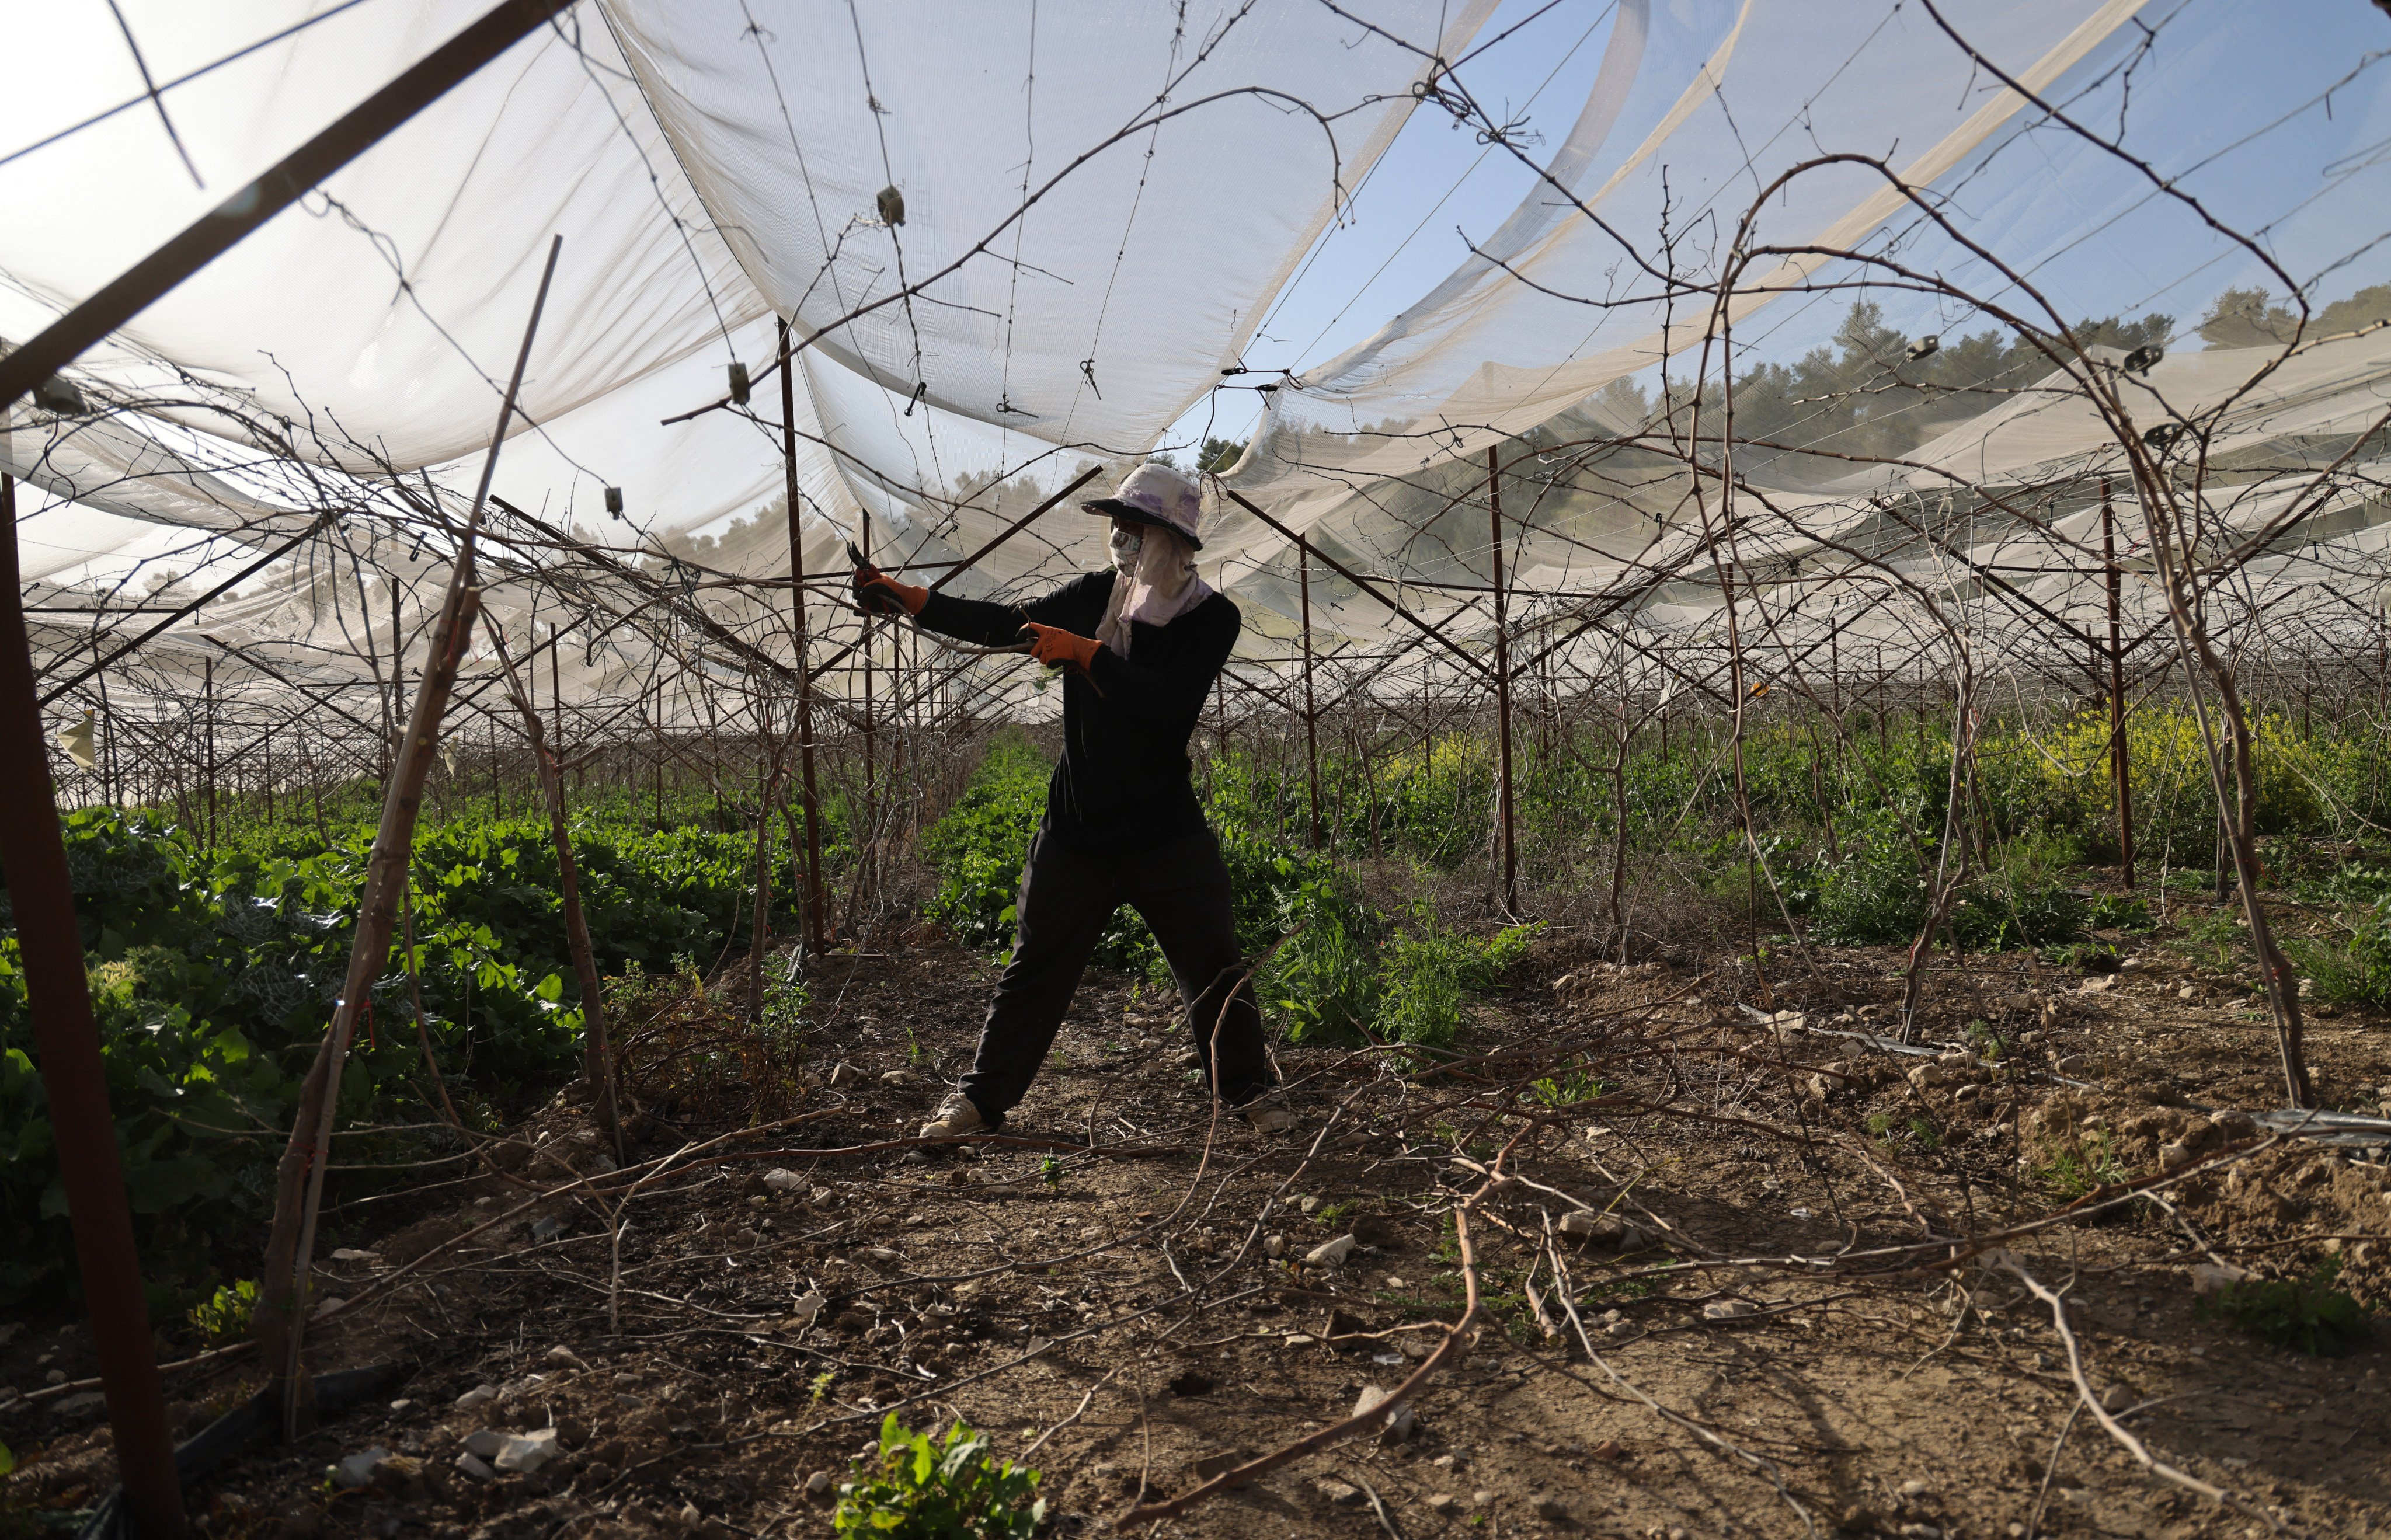 A Thai agricultural worker tends to a field near the central Israeli city of Beersheba in 2021. Thais in Israel can earn many times the monthly salary they would in the farming communities they leave behind. Photo: AFP